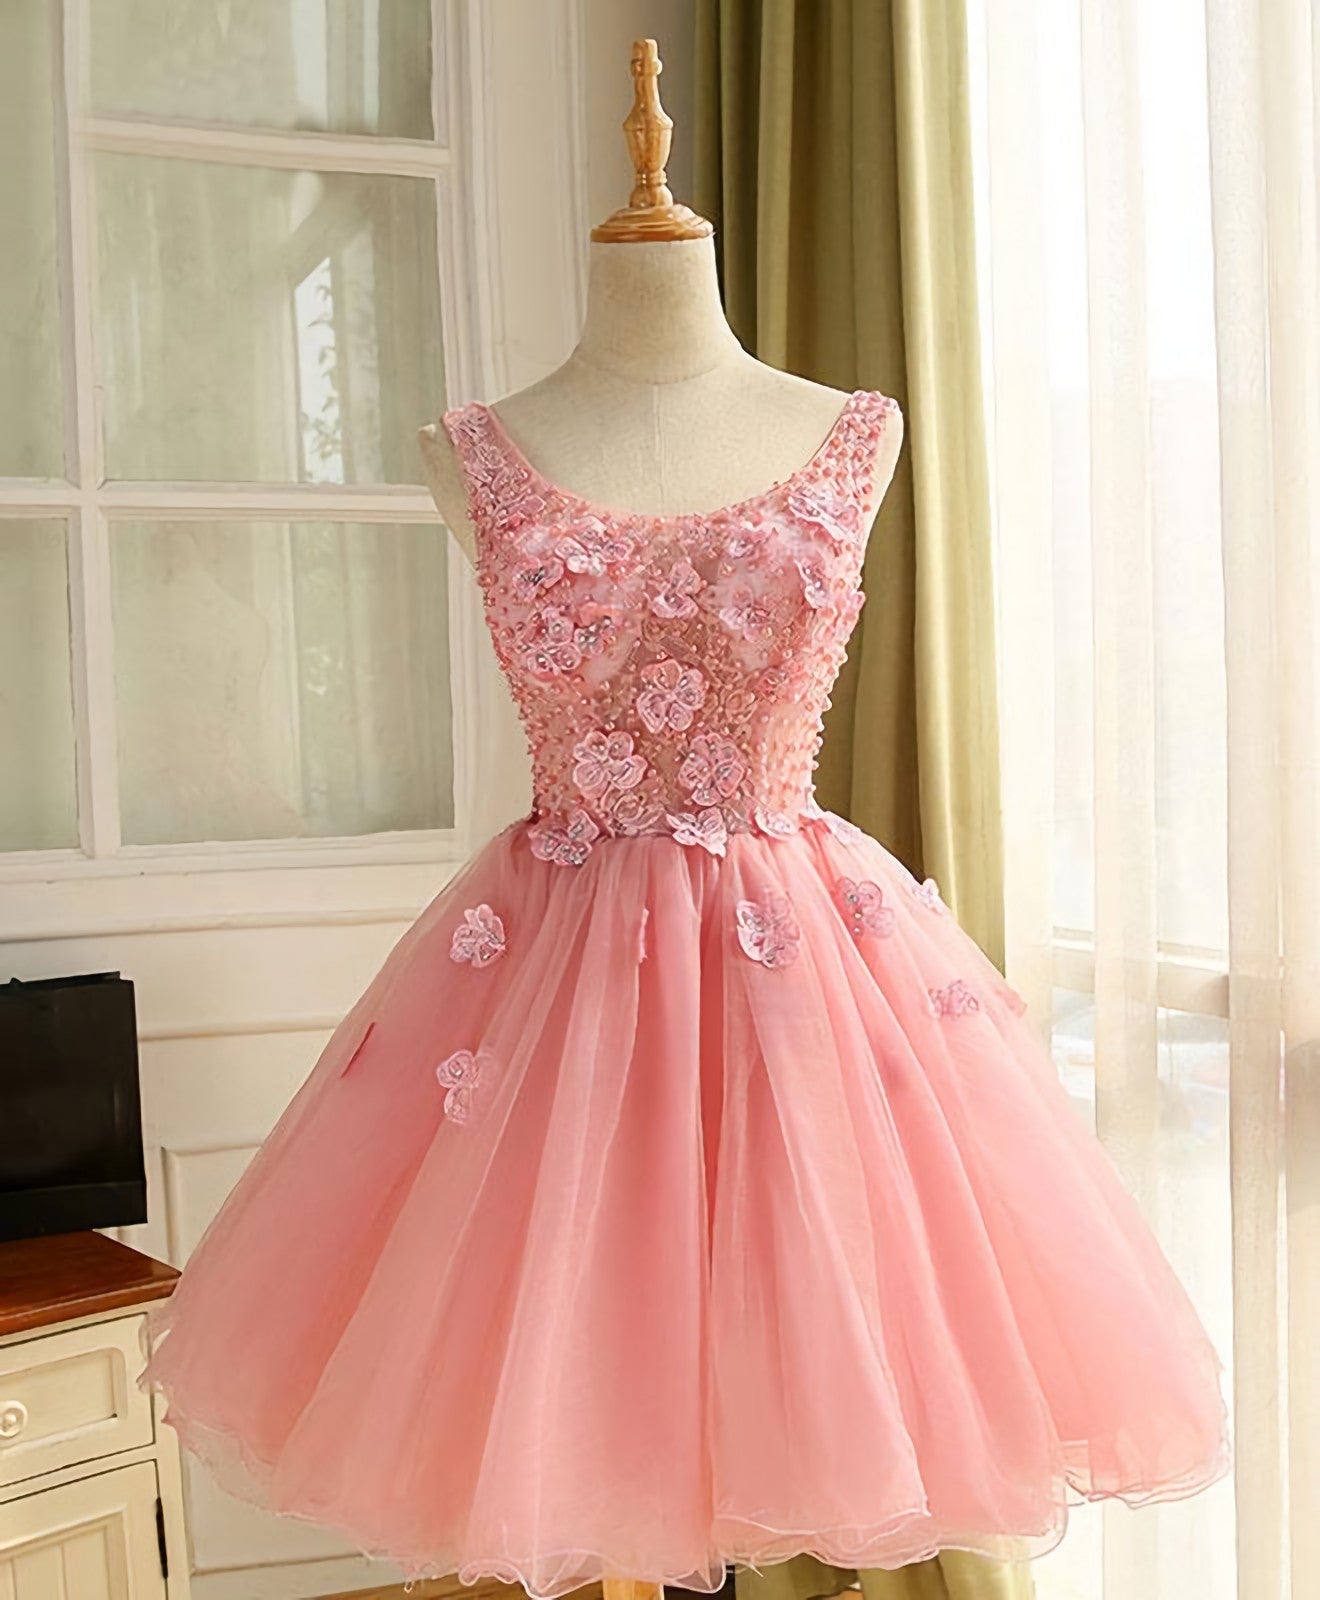 Cute A Line Pink Tulle Pearl Short Corset Prom Dress, Corset Homecoming Dress outfit, Formal Dresses For 30 Year Olds